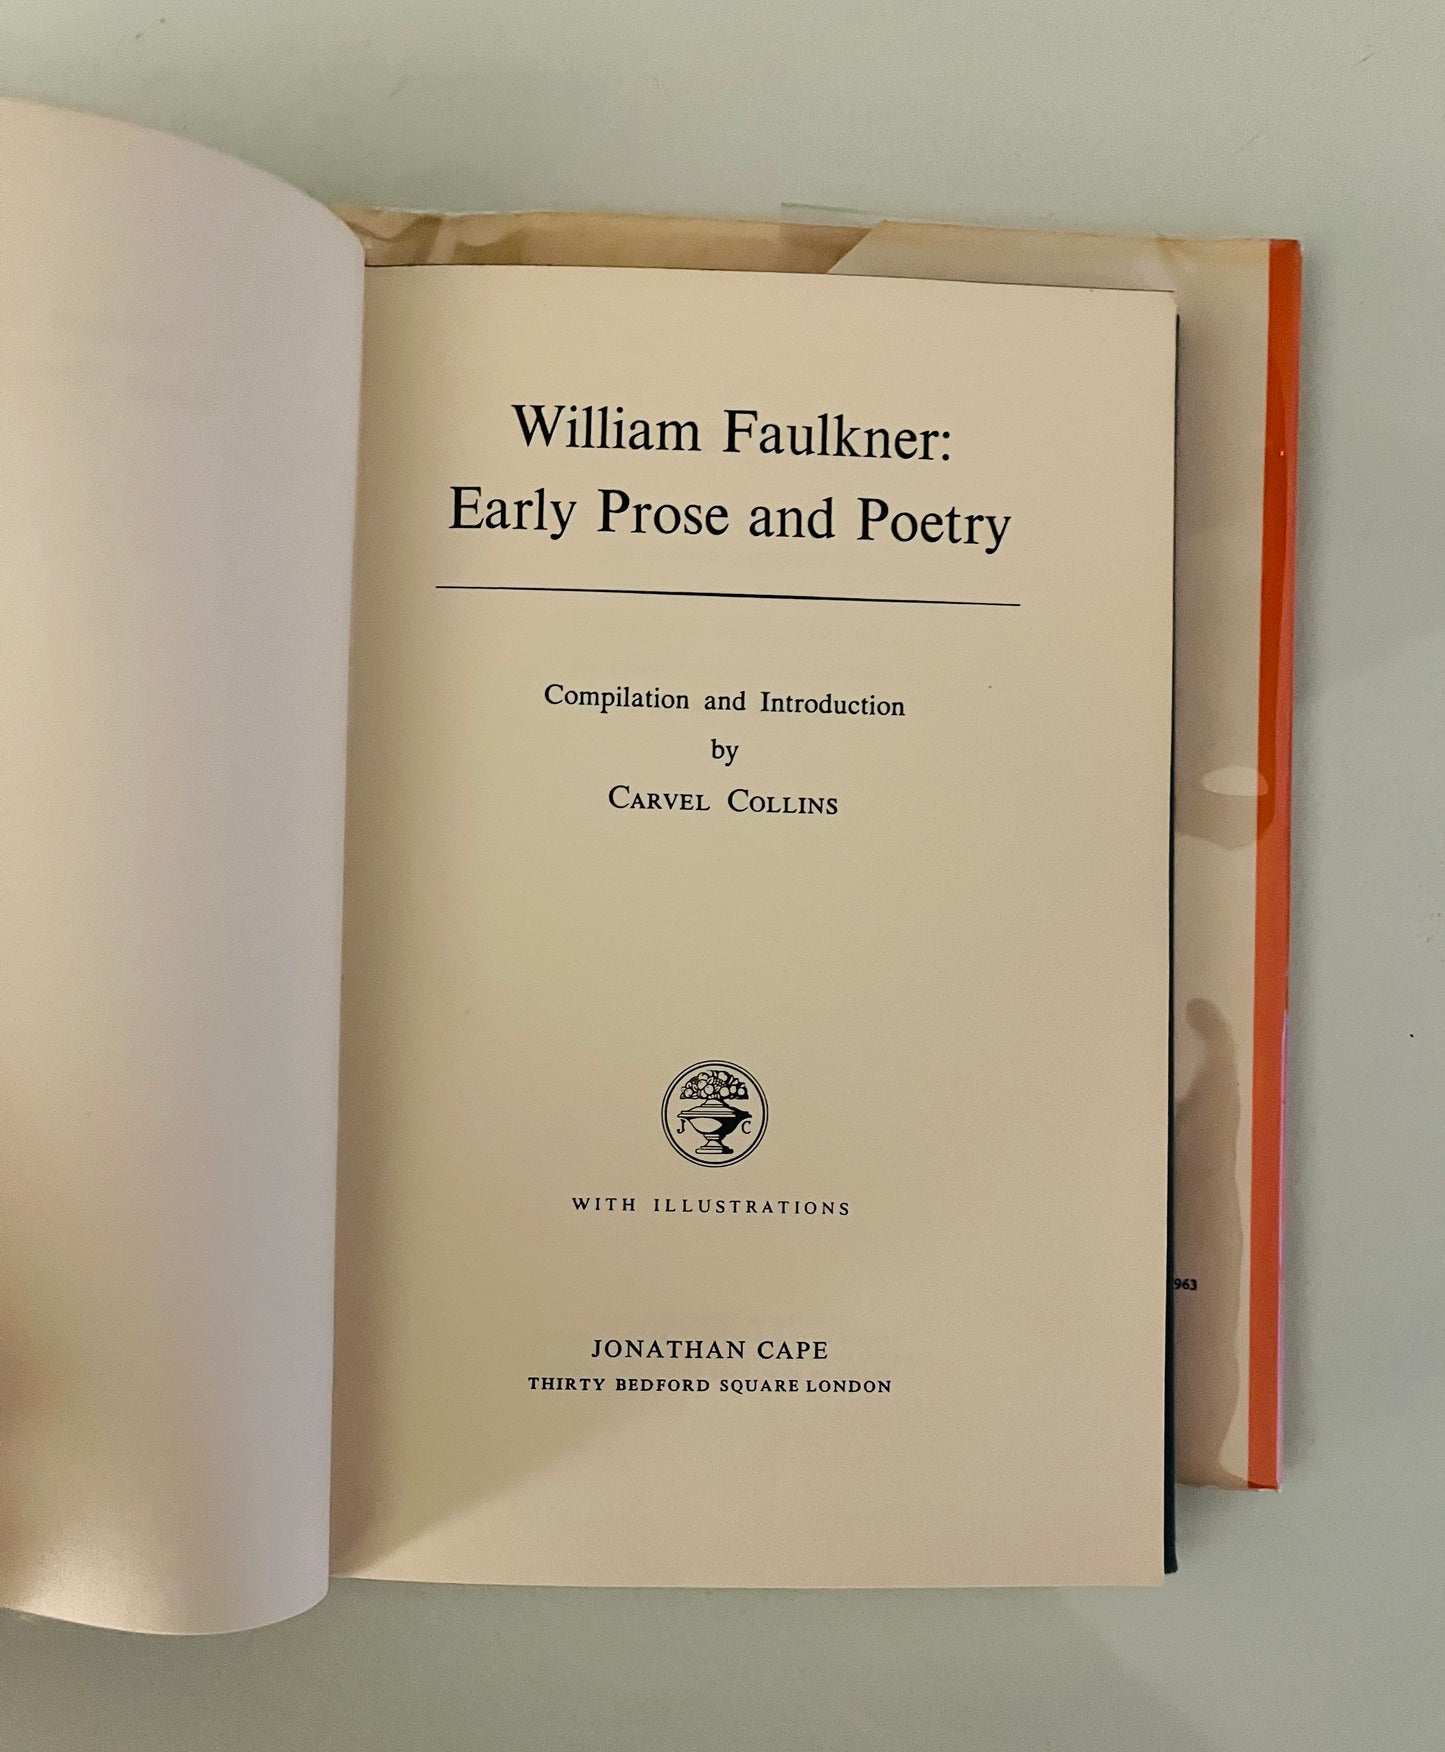 William Faulkner: Early Prose and Poetry